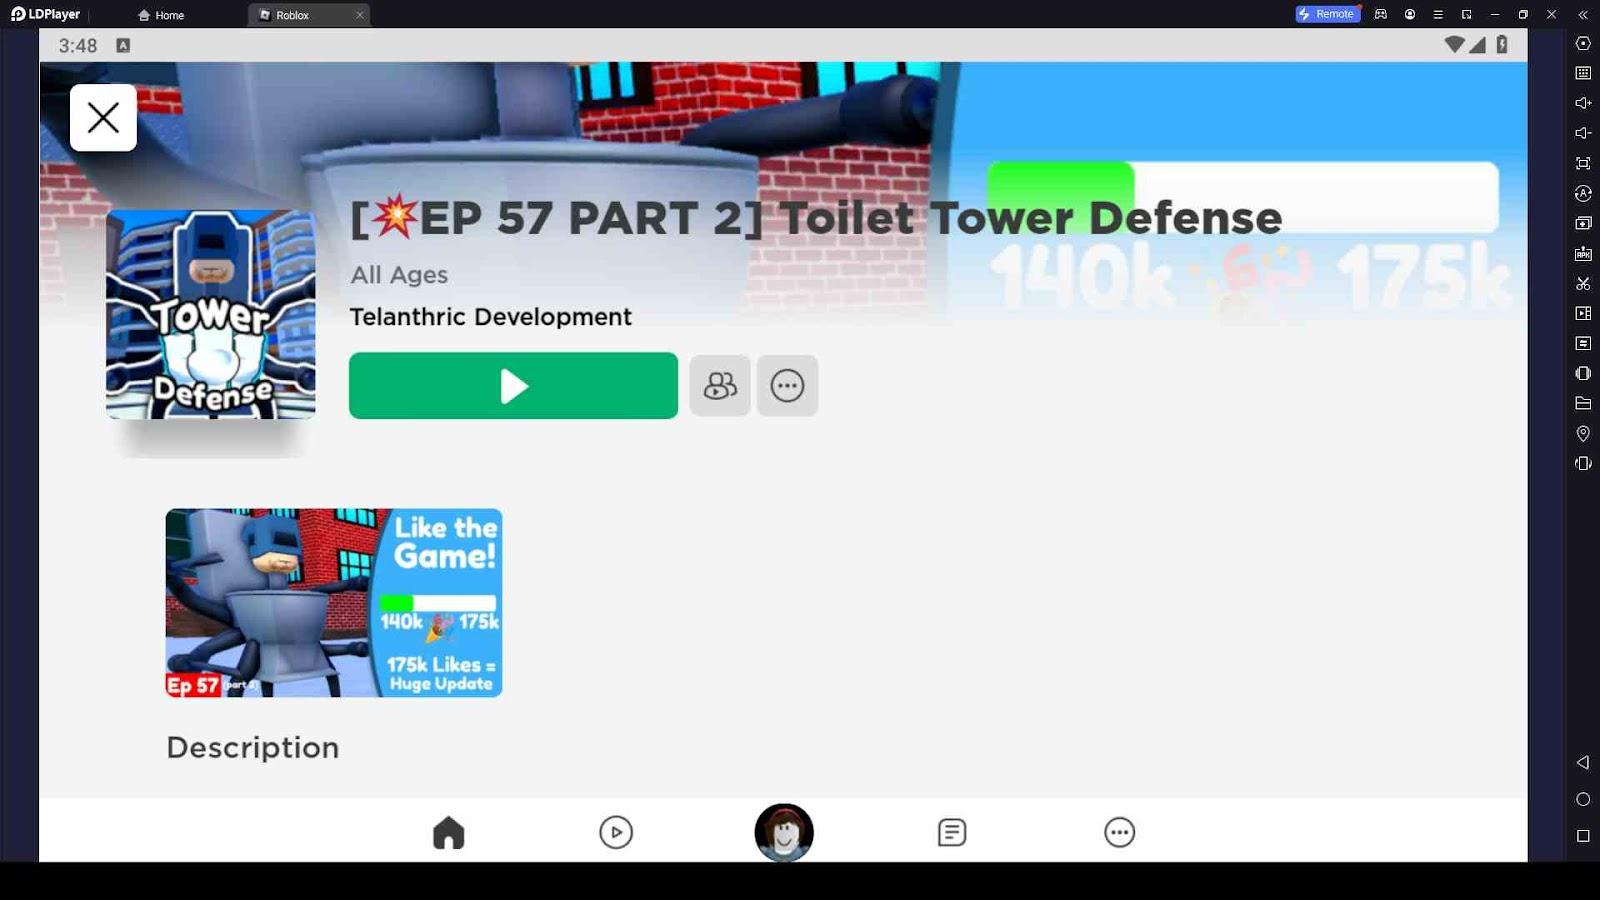 Toilet Tower Defense codes for December 2023